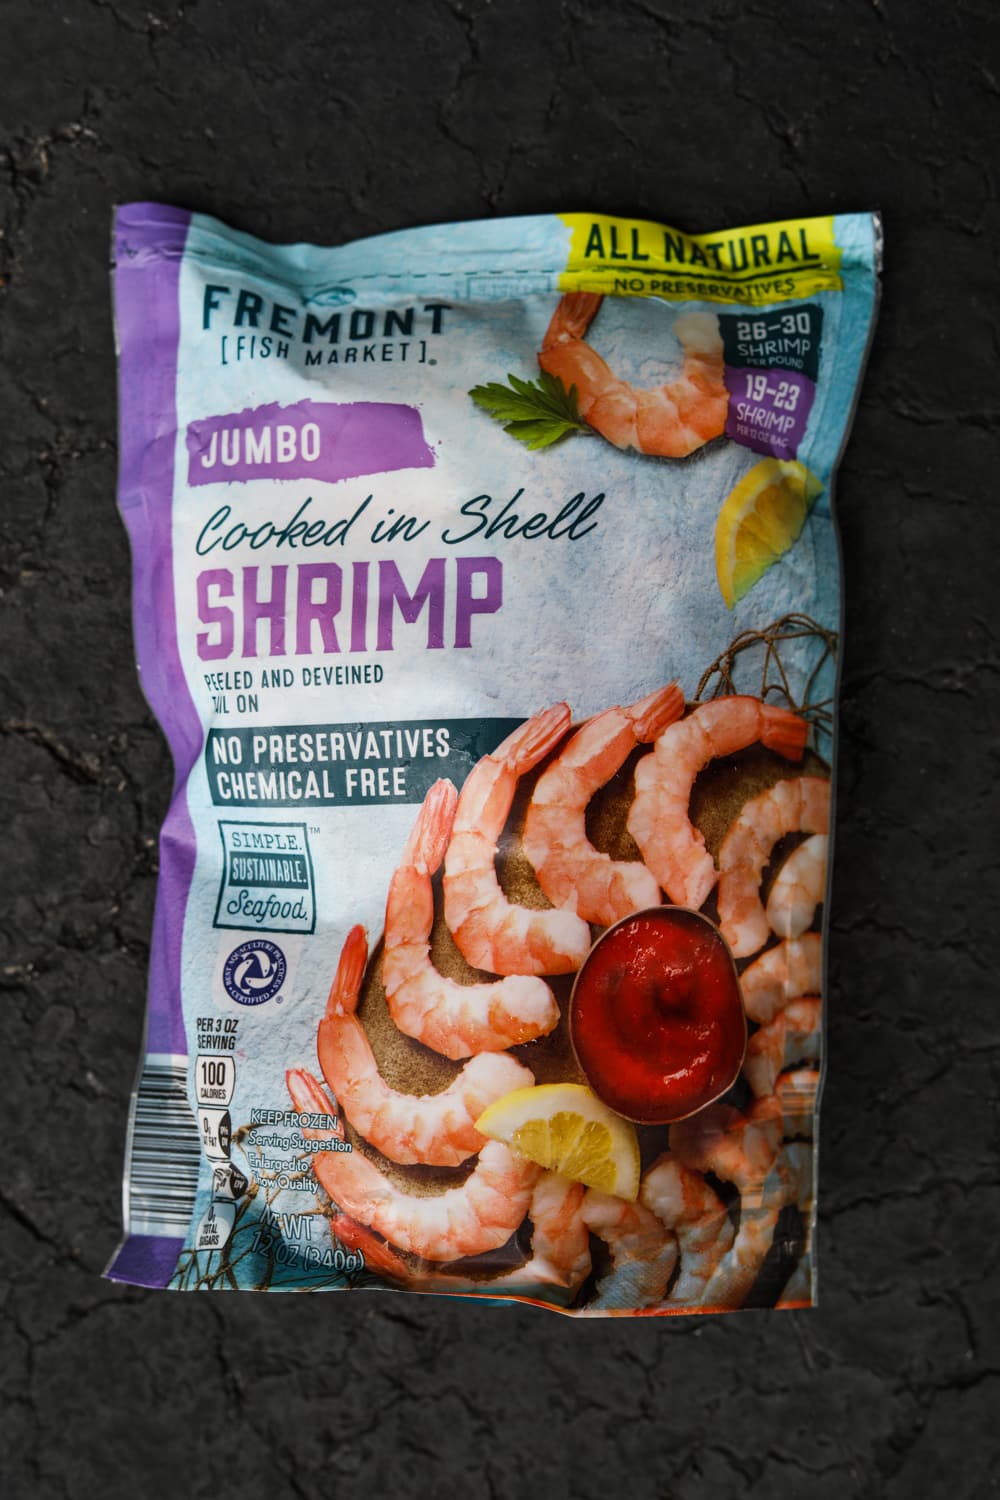 A large package of cooked shrimp.